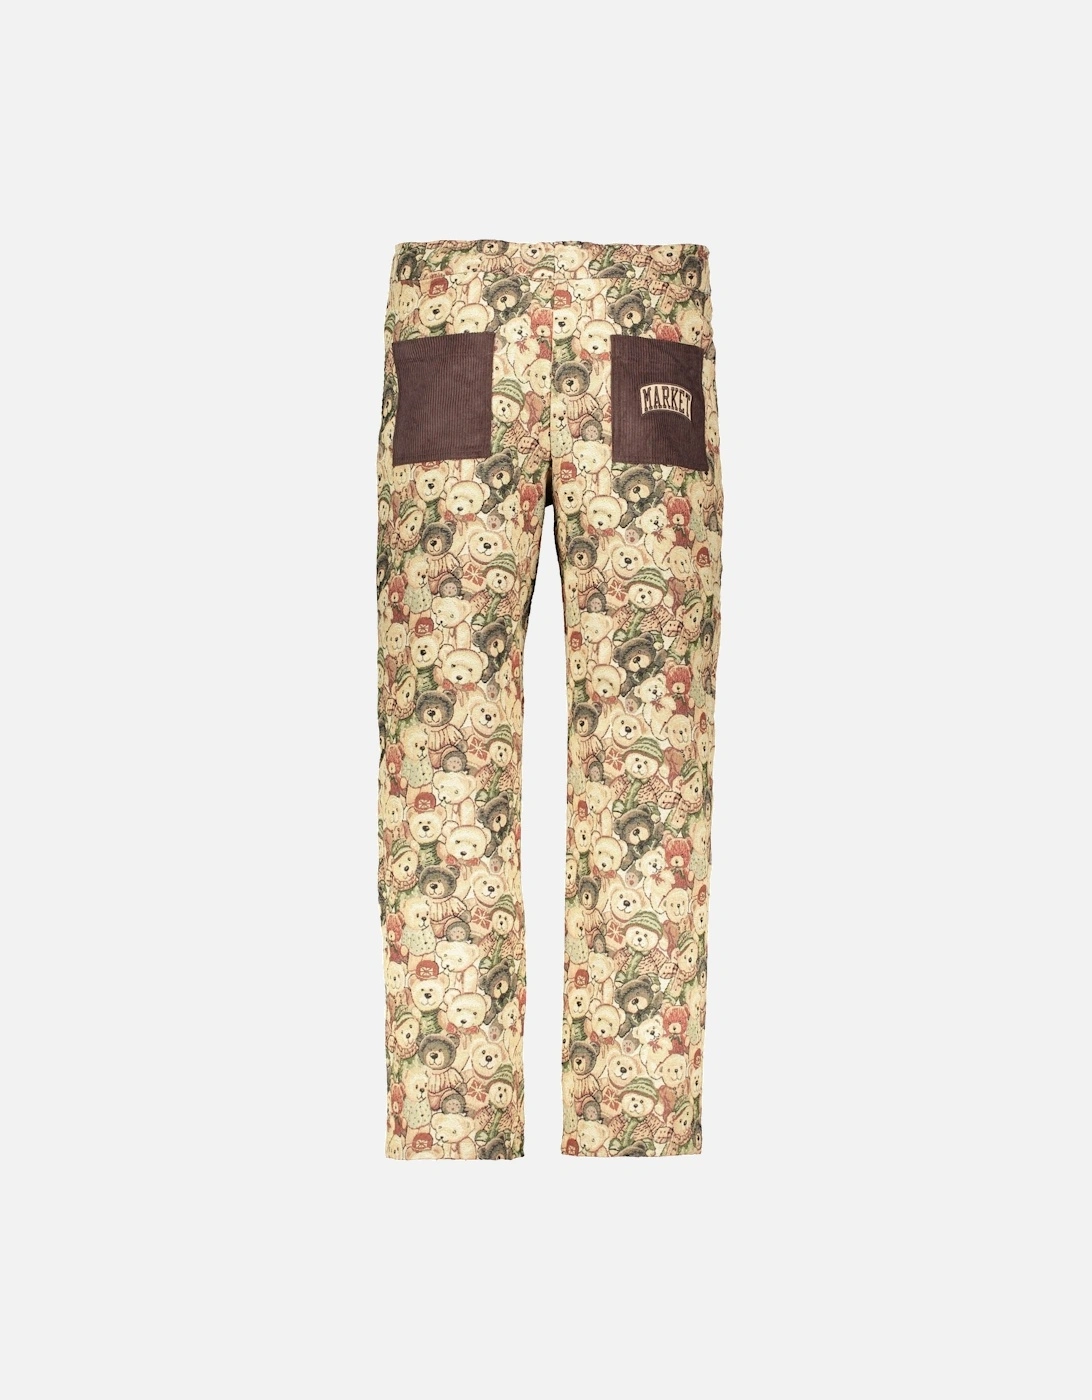 Softcore Tapestry Pants - Multi